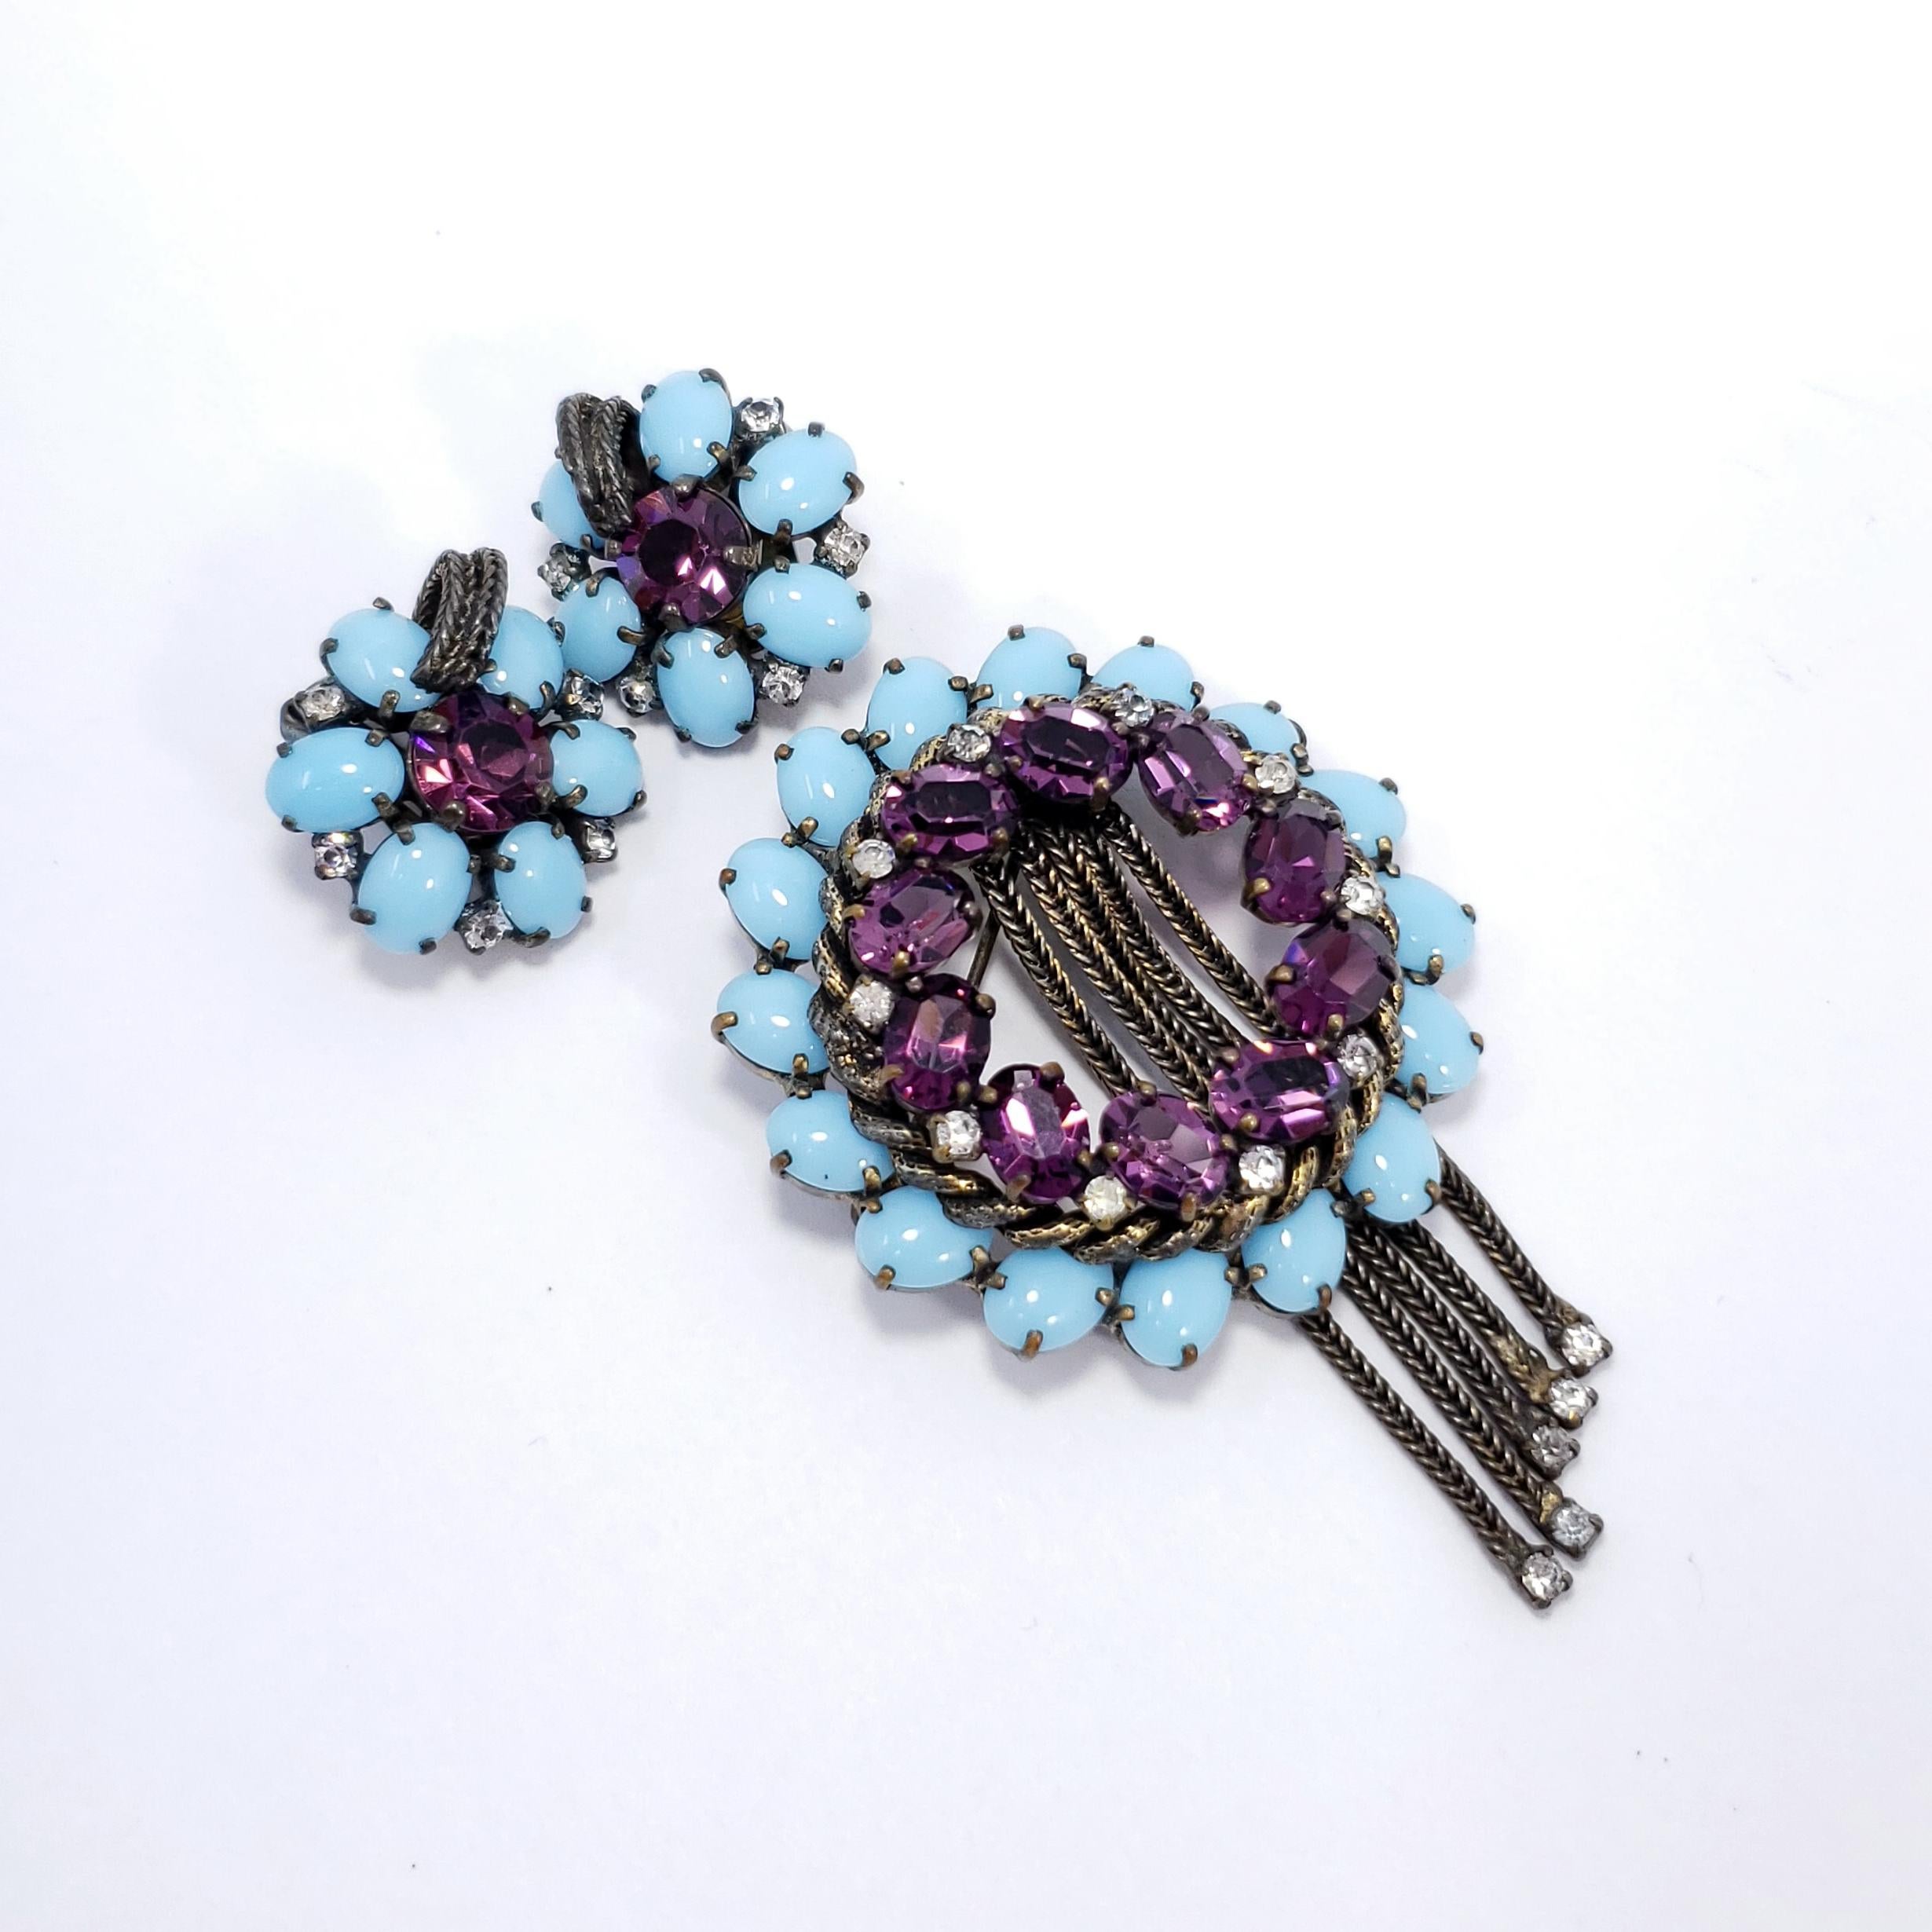 Vintage Weiss brooch and clip on earrings. A floral-themed collection, featuring a dazzling display of turquoise cabochons and amethyst crystals prong-set in a brass tone setting.

Brooch: 1.75 inches diameter
Earrings: .85 inches diameter 